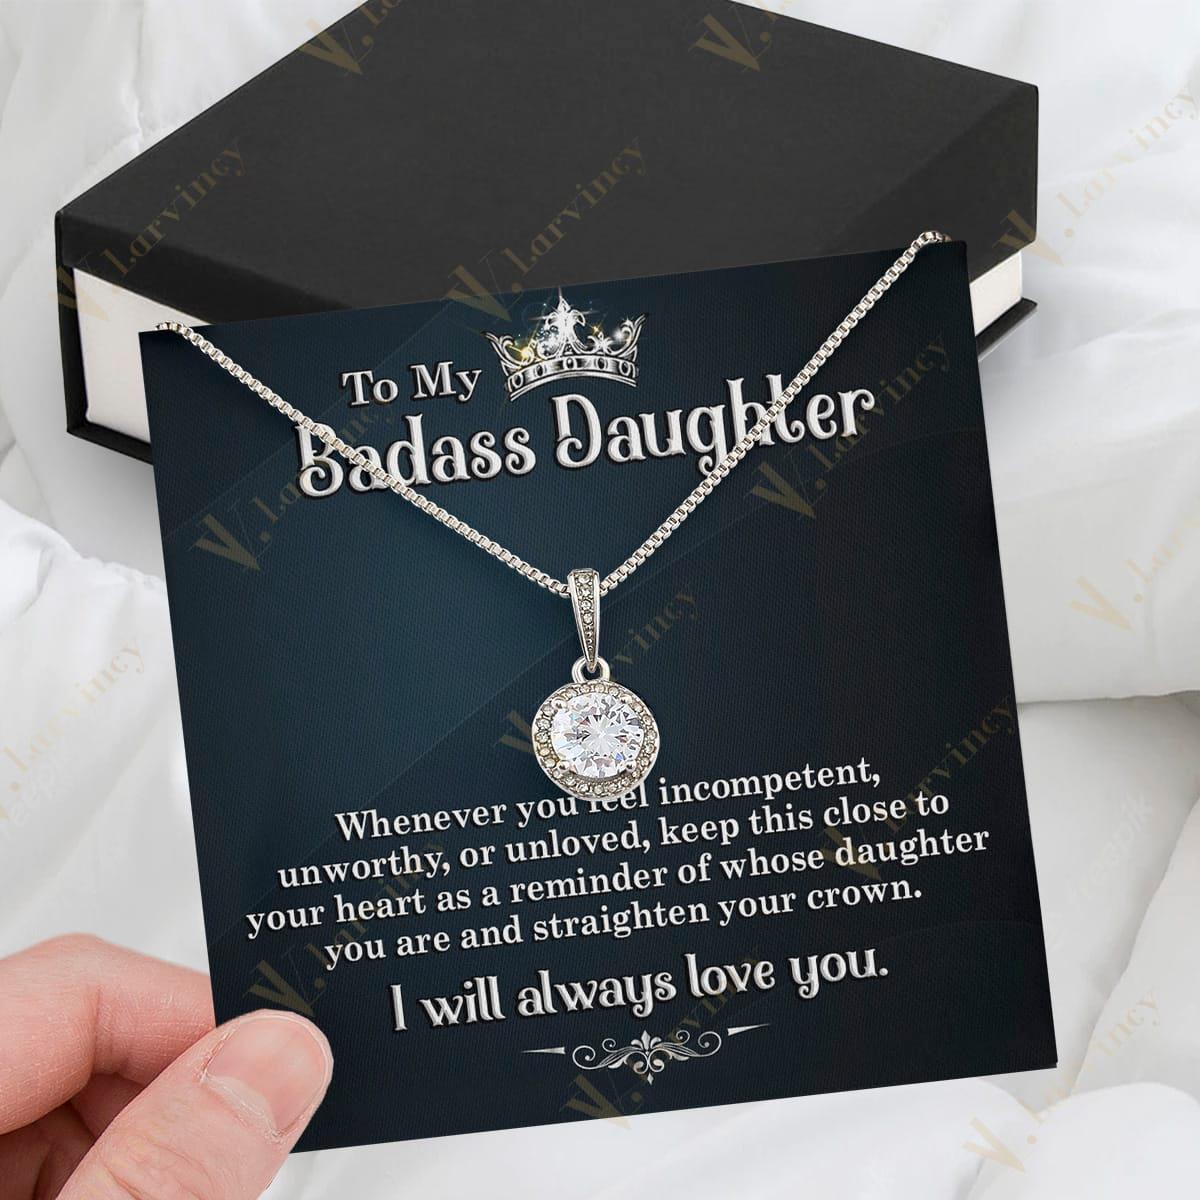 To My Badass Daughter Necklace From Mom, Jewelry For A Daughter From Mom With Gift Box And Personalized Message Card, Fell Incompetent - Larvincy